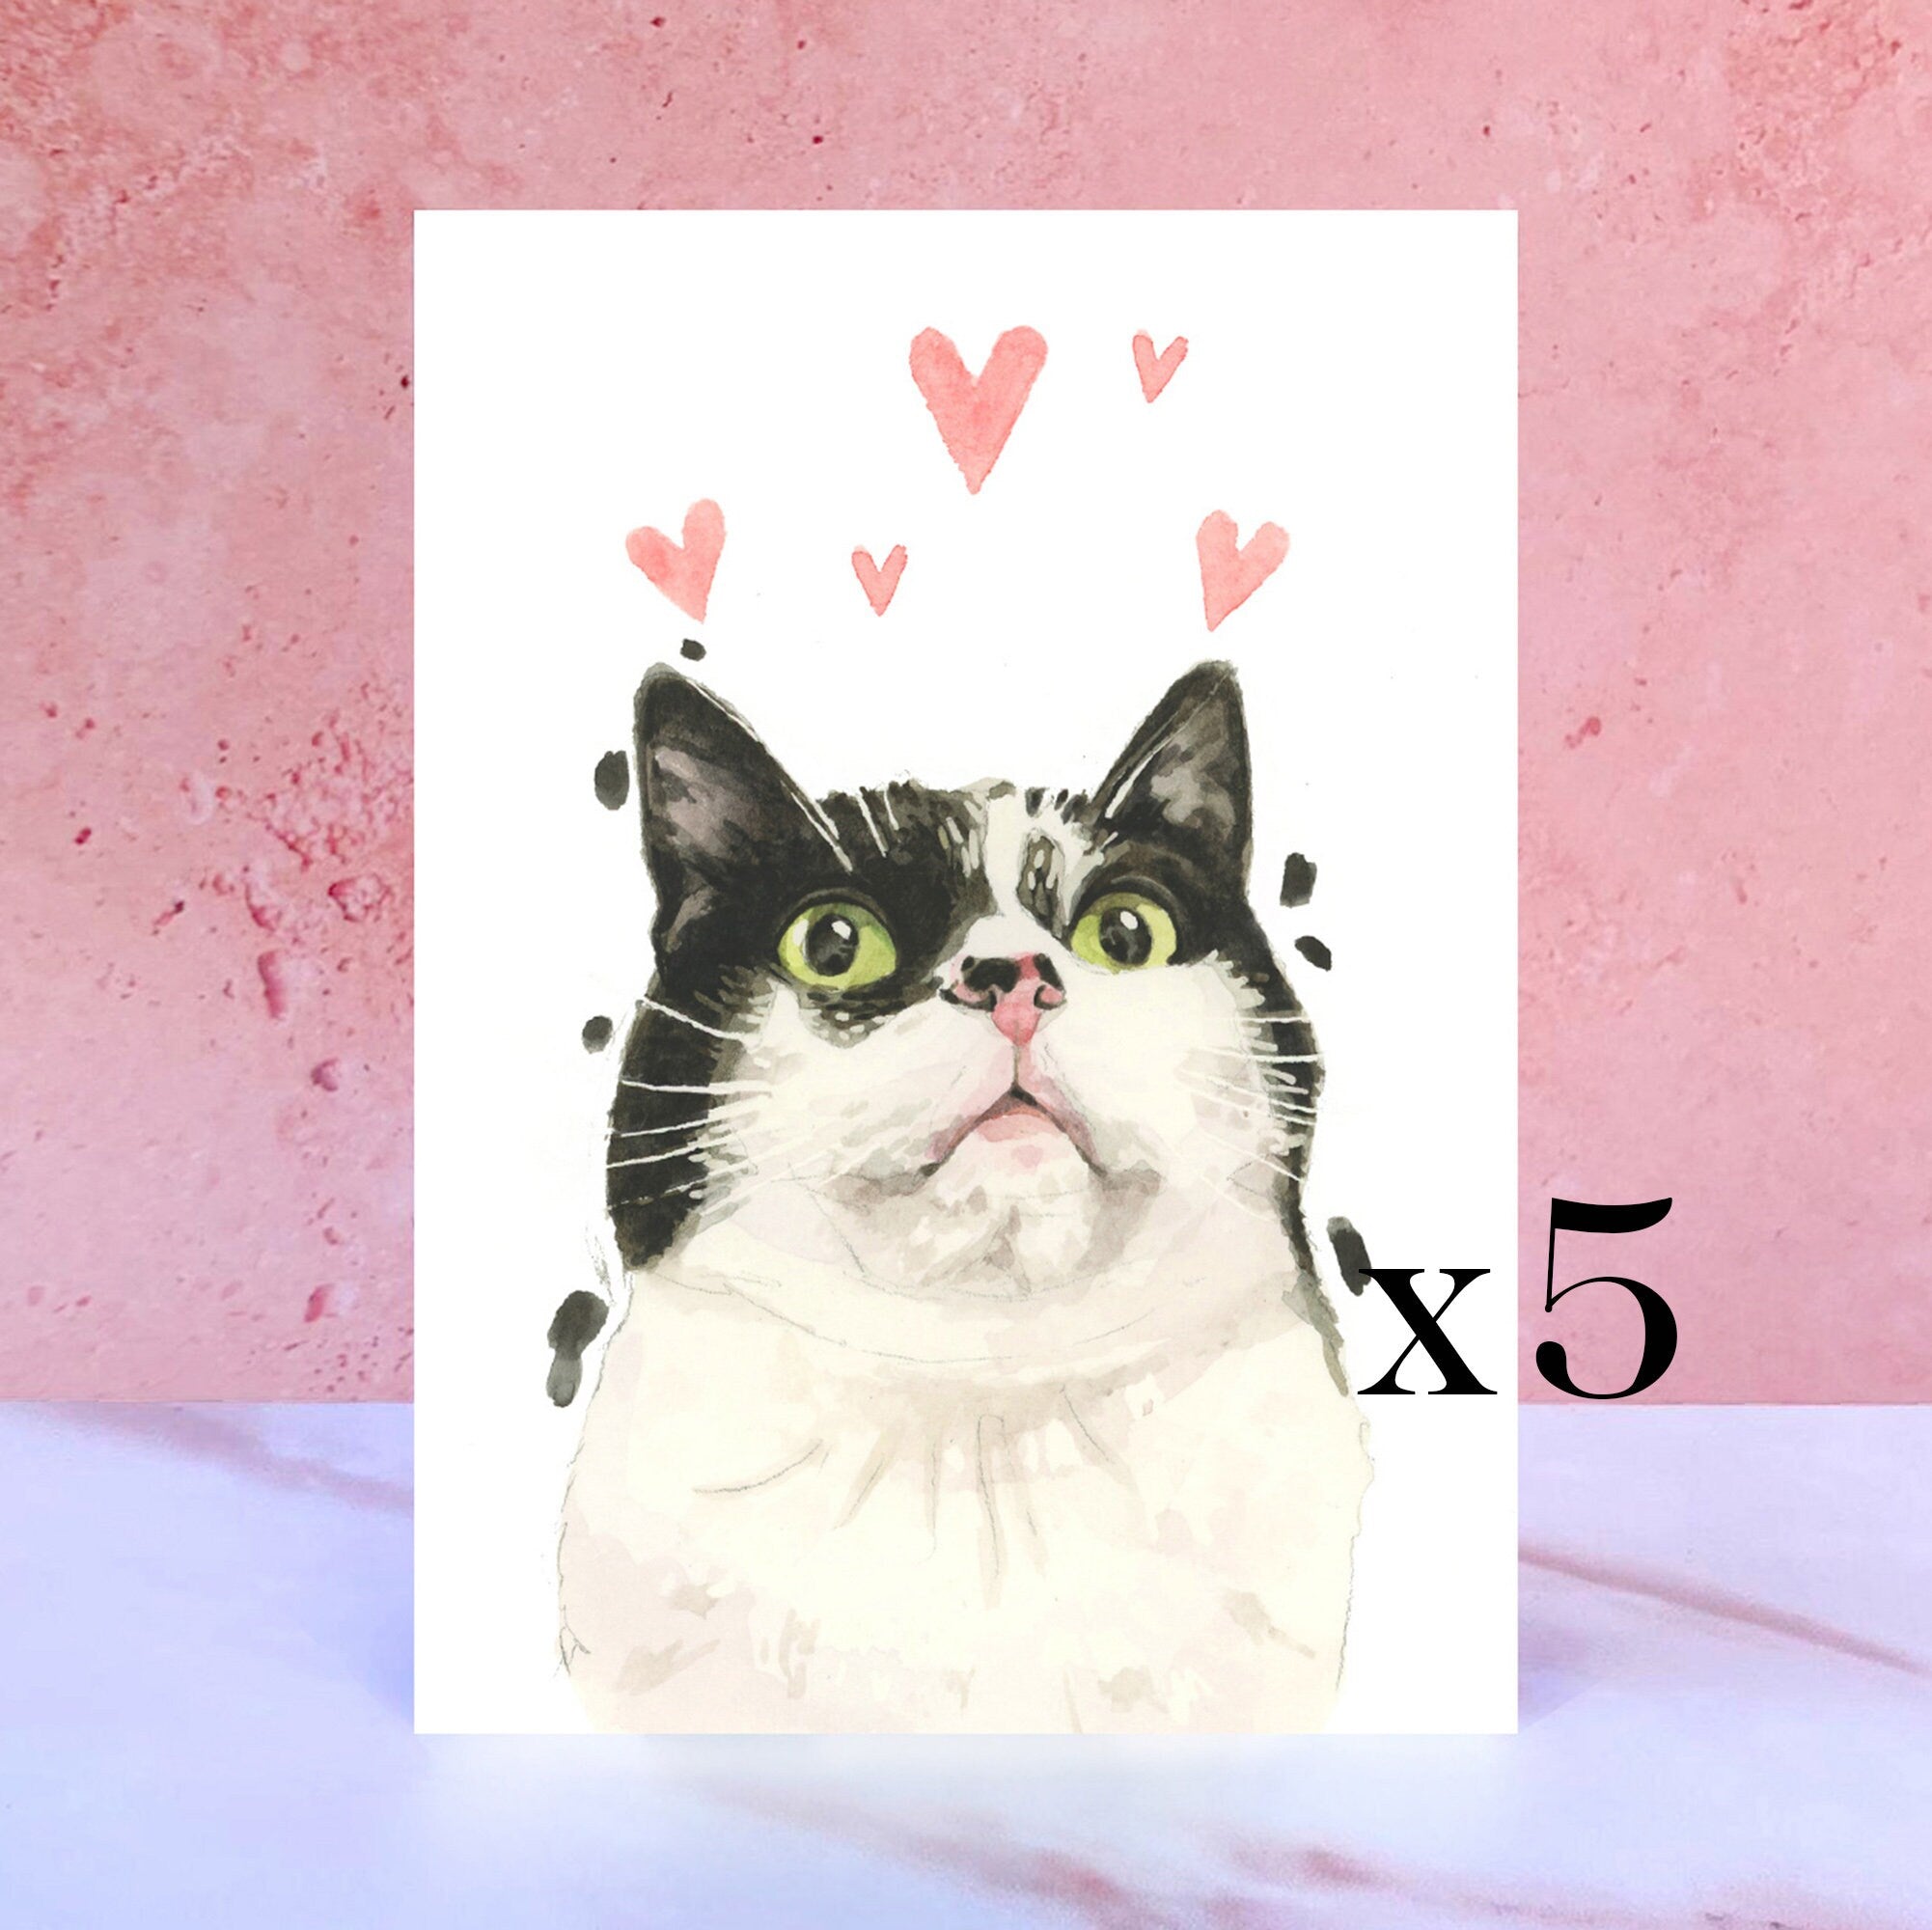 Pack of 5 Black and White Cat Licks & Kisses Card for Valentines, Anniversaries and from the Cat